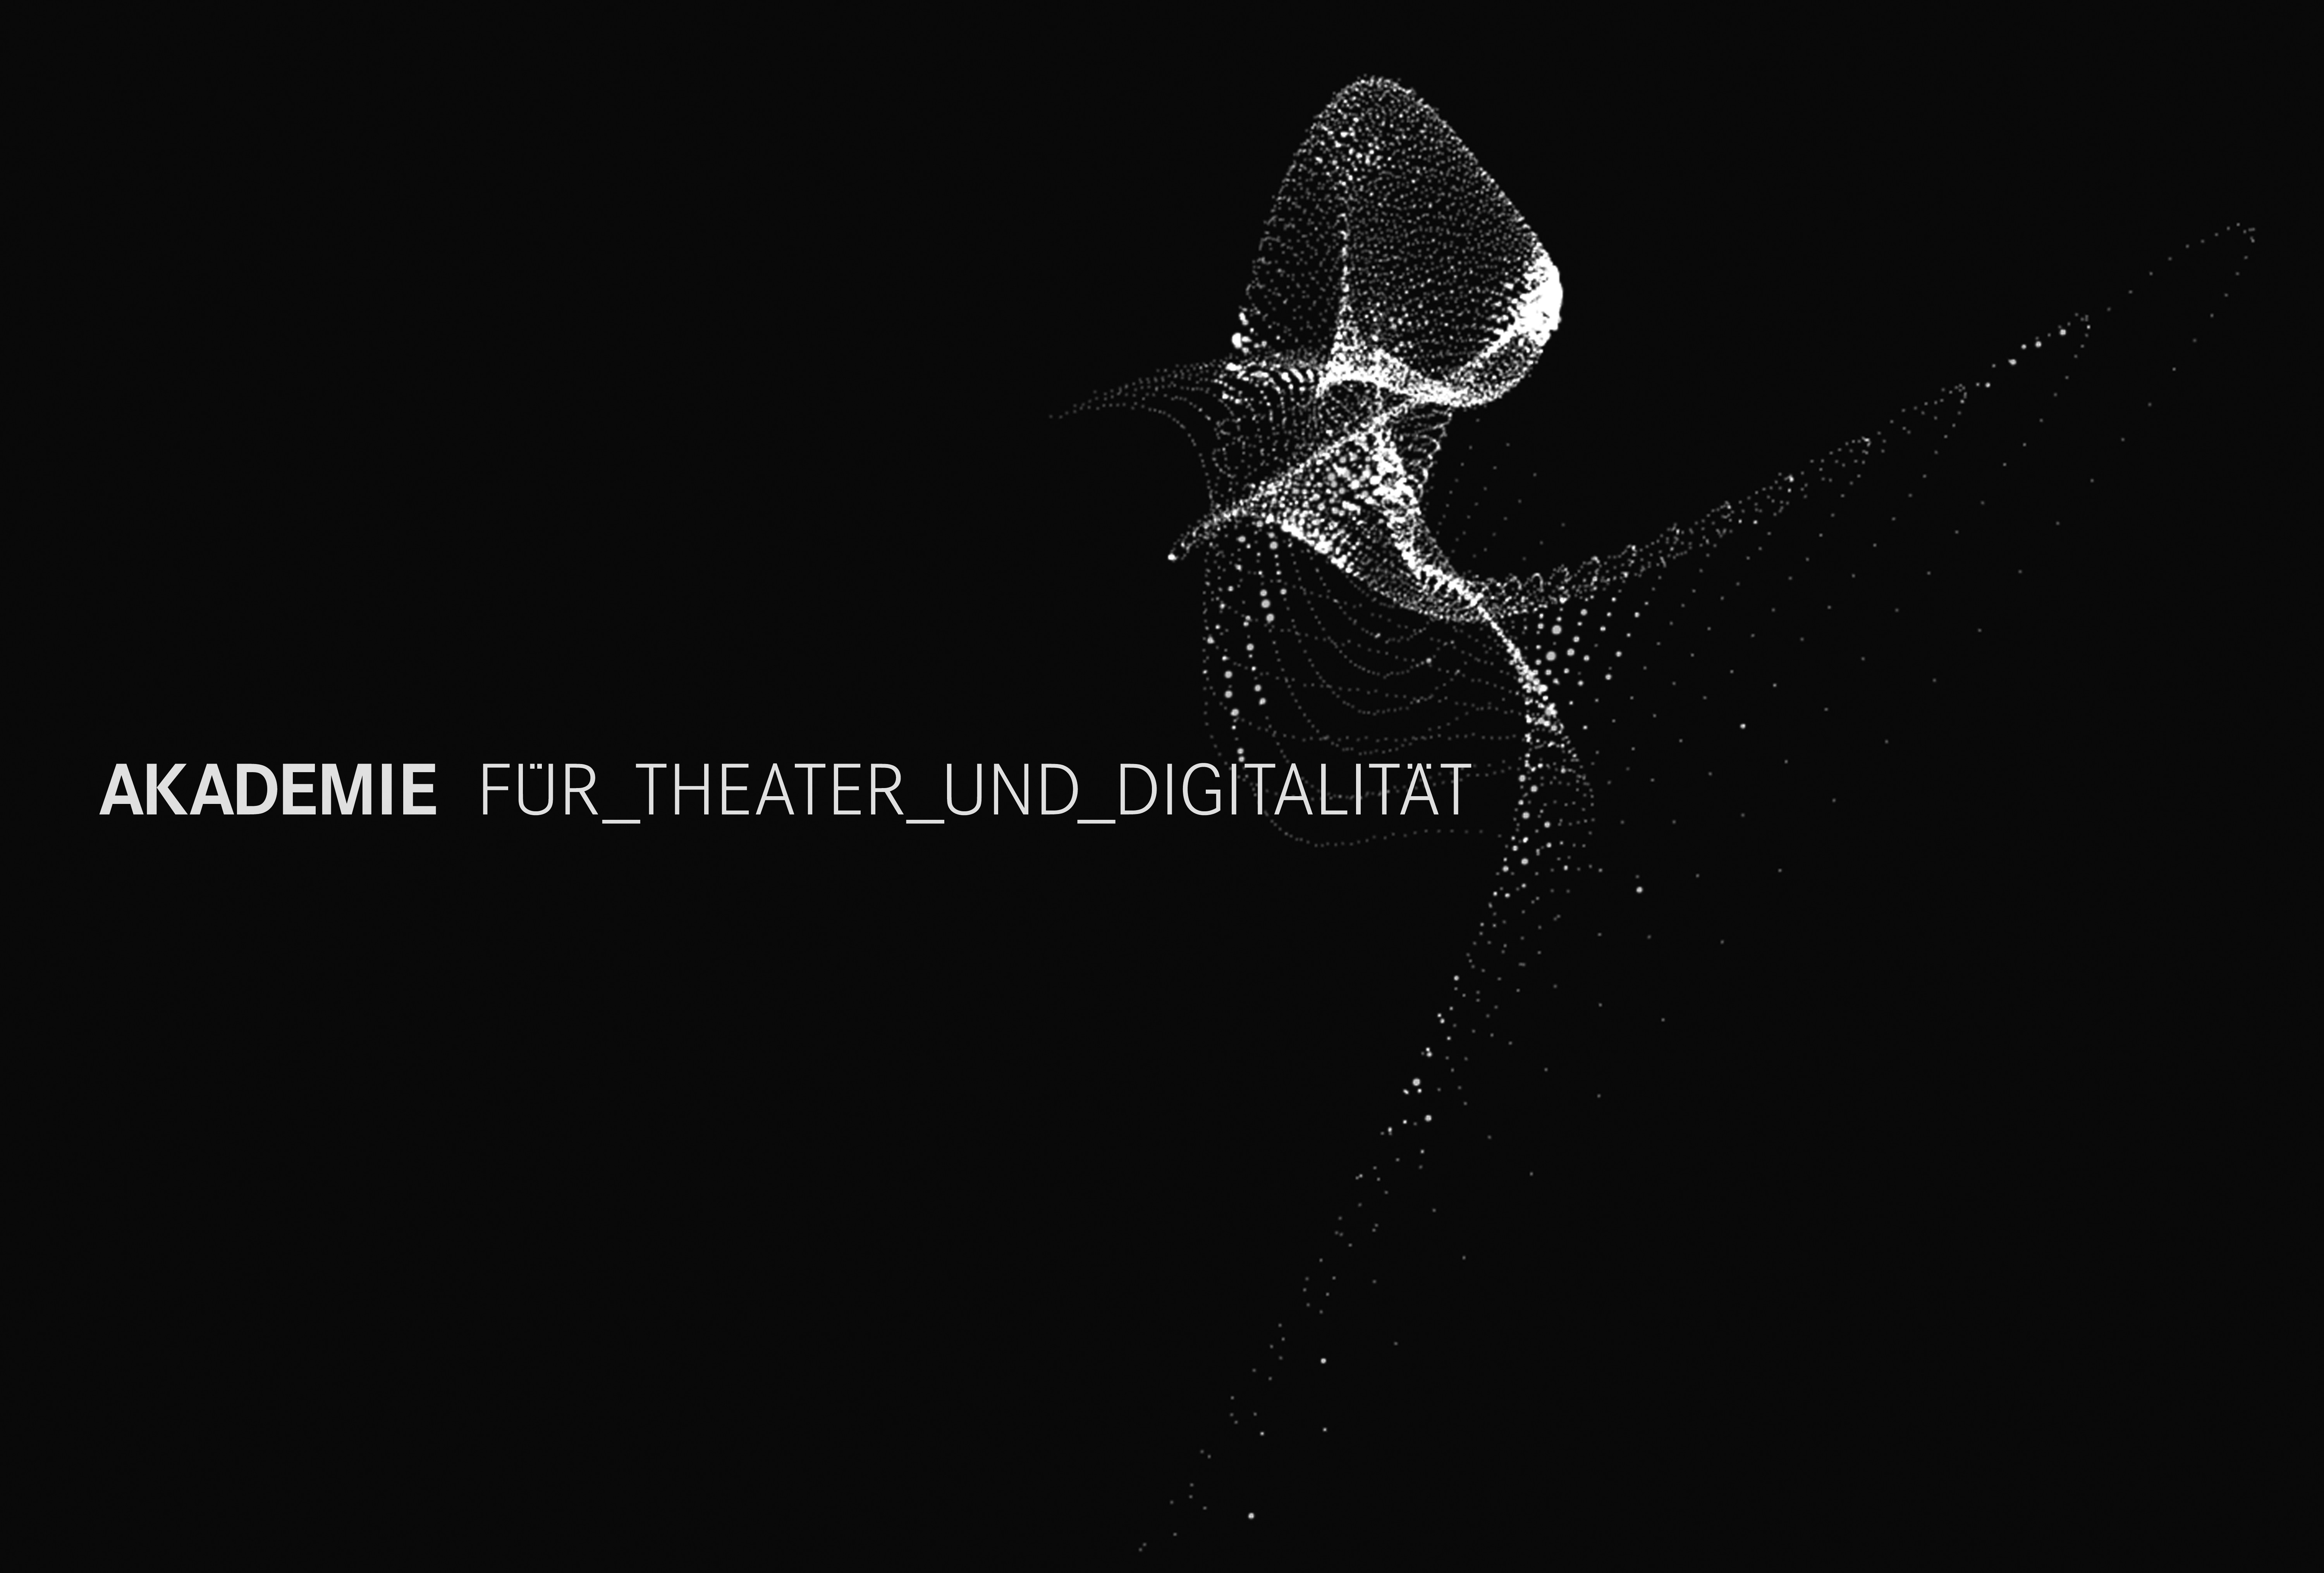 WORKSHOP - OCTOBER 8 - ACADEMY FOR THEATRE AND DIGITALITY. THEATRE DORTMUND